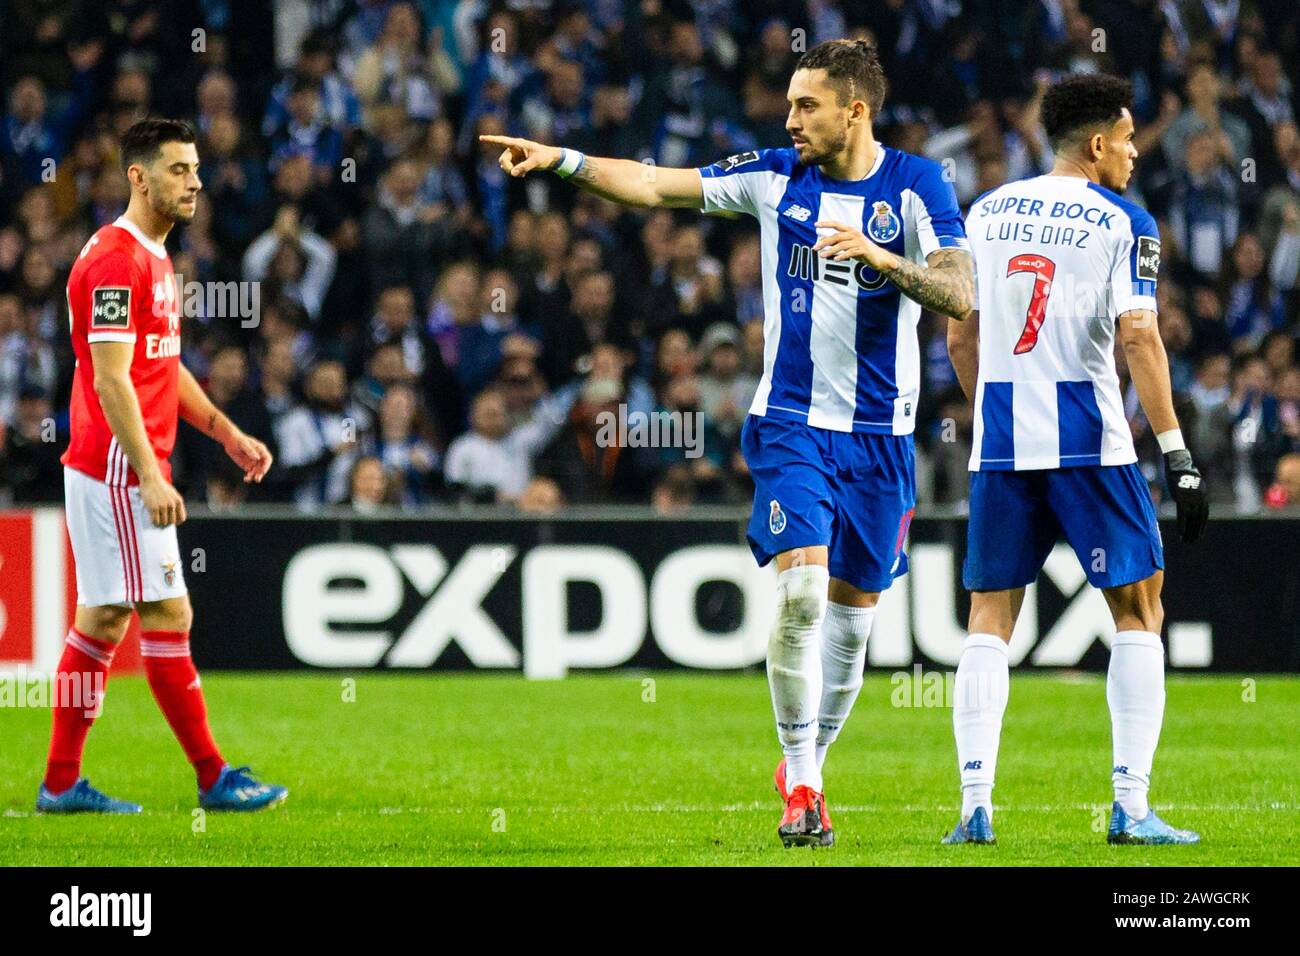 Porto, Portugal. 08th Feb, 2020. FC Porto's player Tecatito Corona  celebrates a goal during a football match for the Portuguese first league  between FC Porto and SL Benfica at Dragon Stadium in